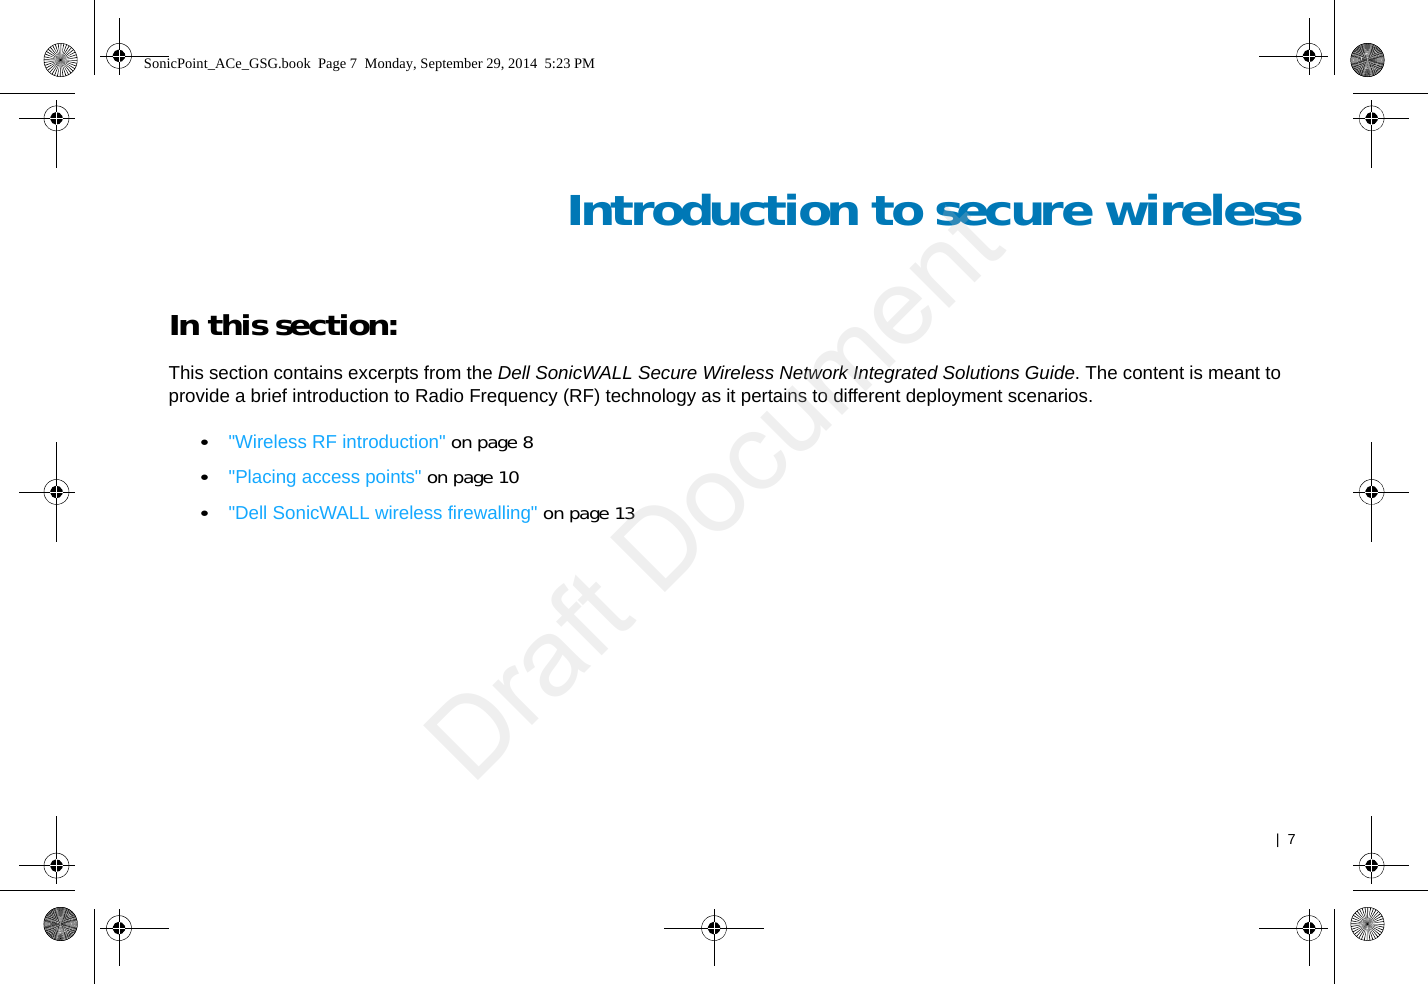   |  7Introduction to secure wirelessIn this section:This section contains excerpts from the Dell SonicWALL Secure Wireless Network Integrated Solutions Guide. The content is meant to provide a brief introduction to Radio Frequency (RF) technology as it pertains to different deployment scenarios.•&quot;Wireless RF introduction&quot; on page 8•&quot;Placing access points&quot; on page 10•&quot;Dell SonicWALL wireless firewalling&quot; on page 13SonicPoint_ACe_GSG.book  Page 7  Monday, September 29, 2014  5:23 PMDraft Document